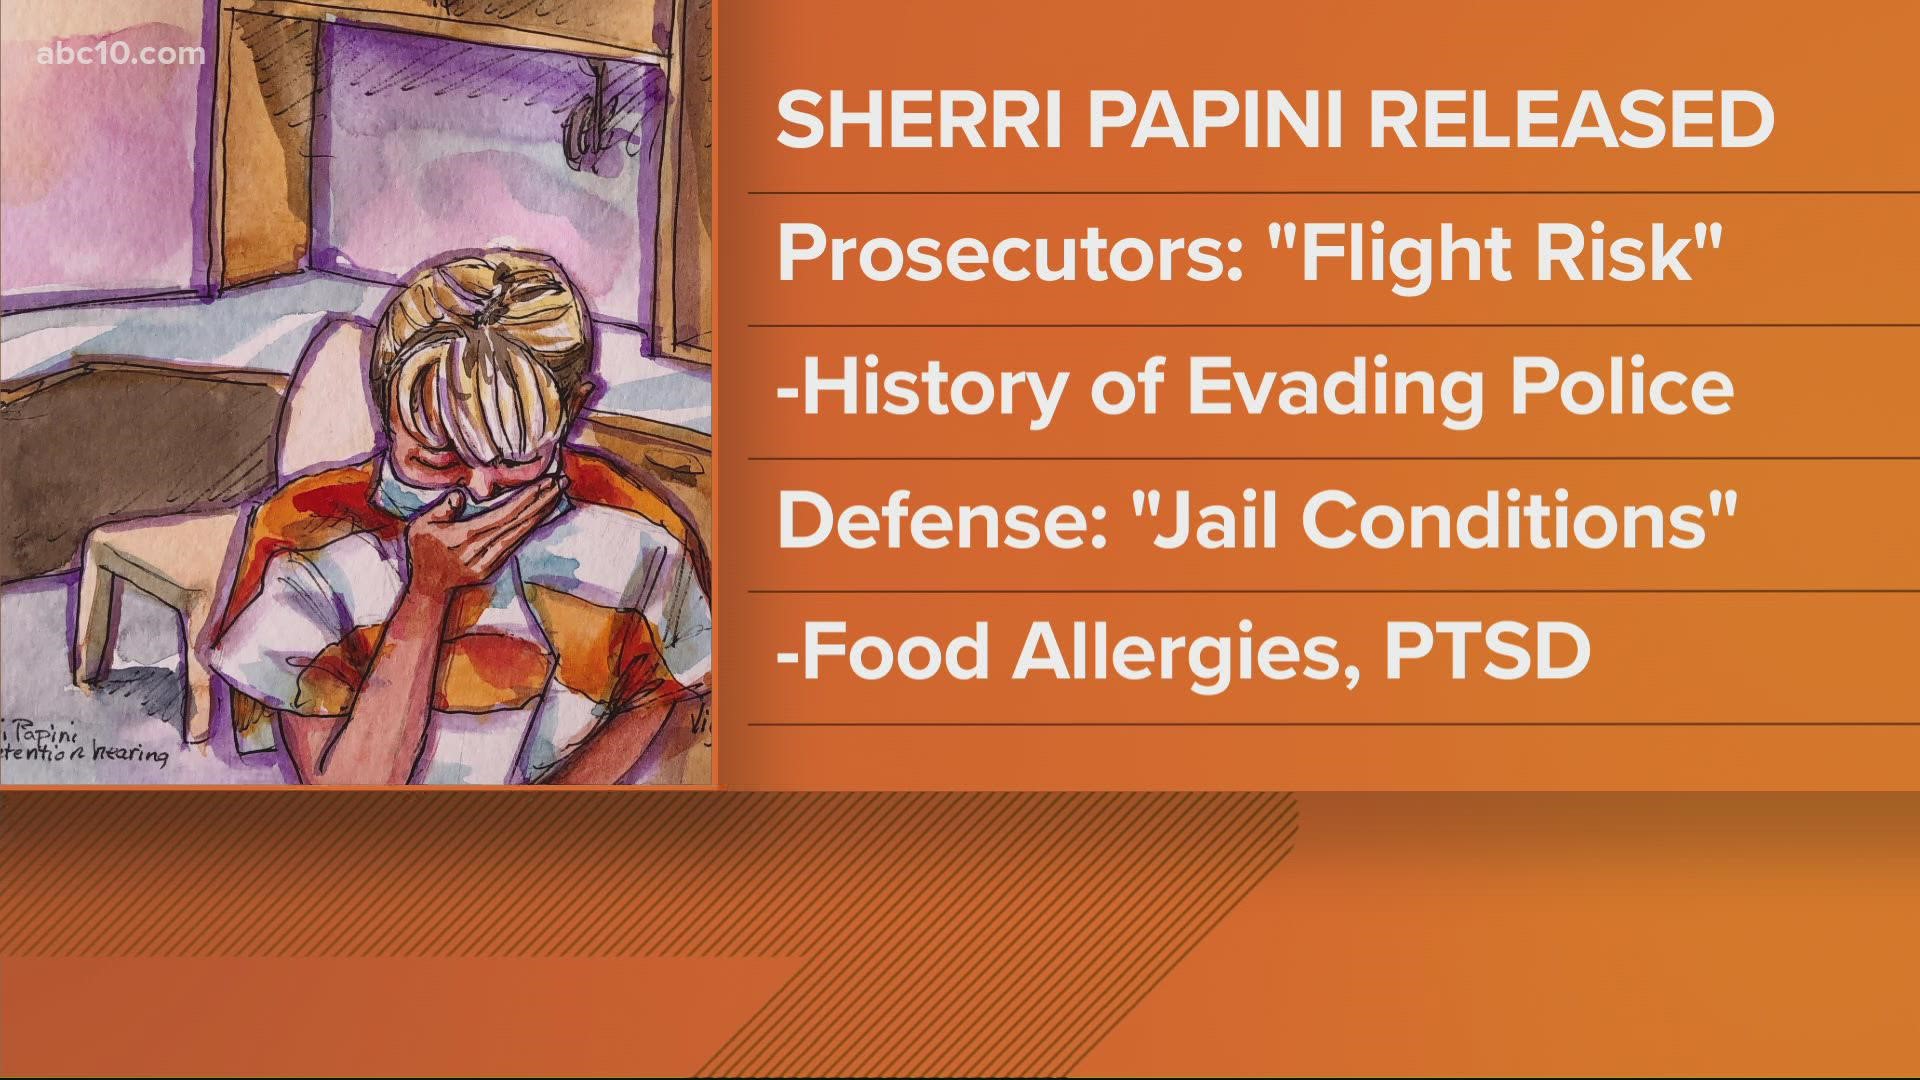 At the bail hearing for the woman accused of fabricating her kidnapping in 2016, federal prosecutors argued Sherri Papini was a flight risk.